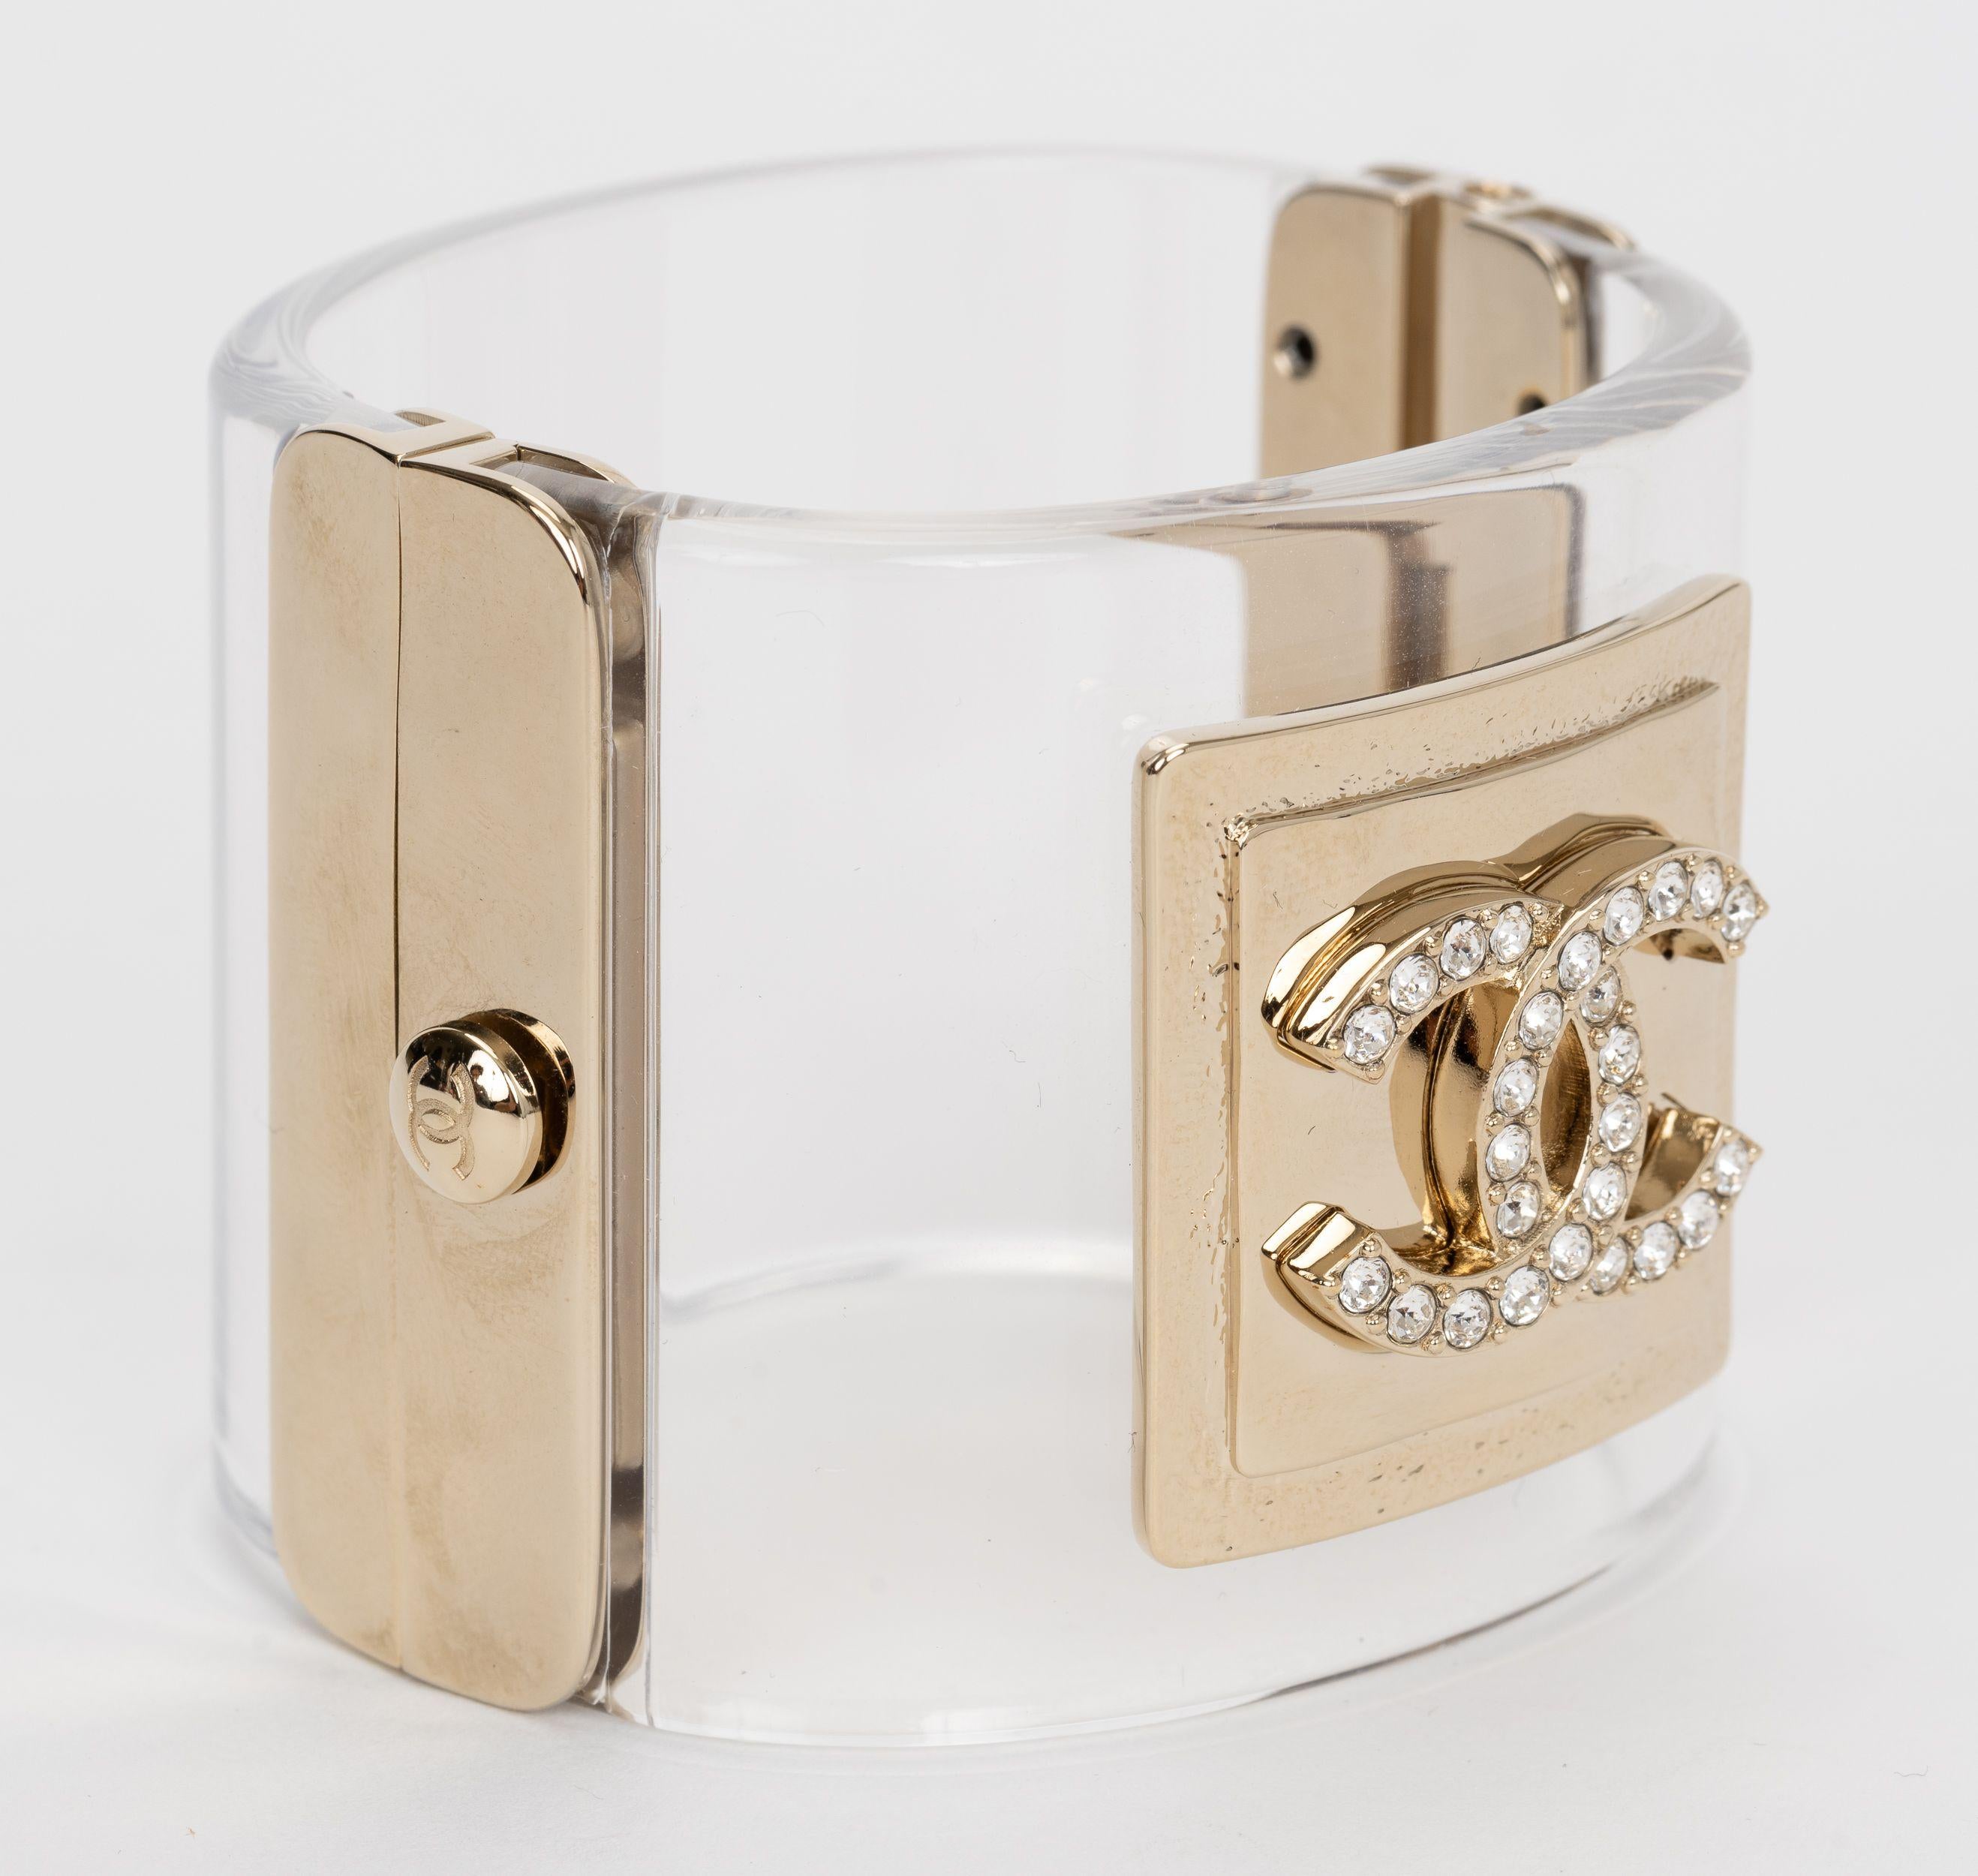 The Spring 2023 Resin and Strass CC Cuff is by Virginie Viard Collection. Clear lucite with gold tone hardware and rhinestone cc logo. Size small. Brand new with original box and duster.